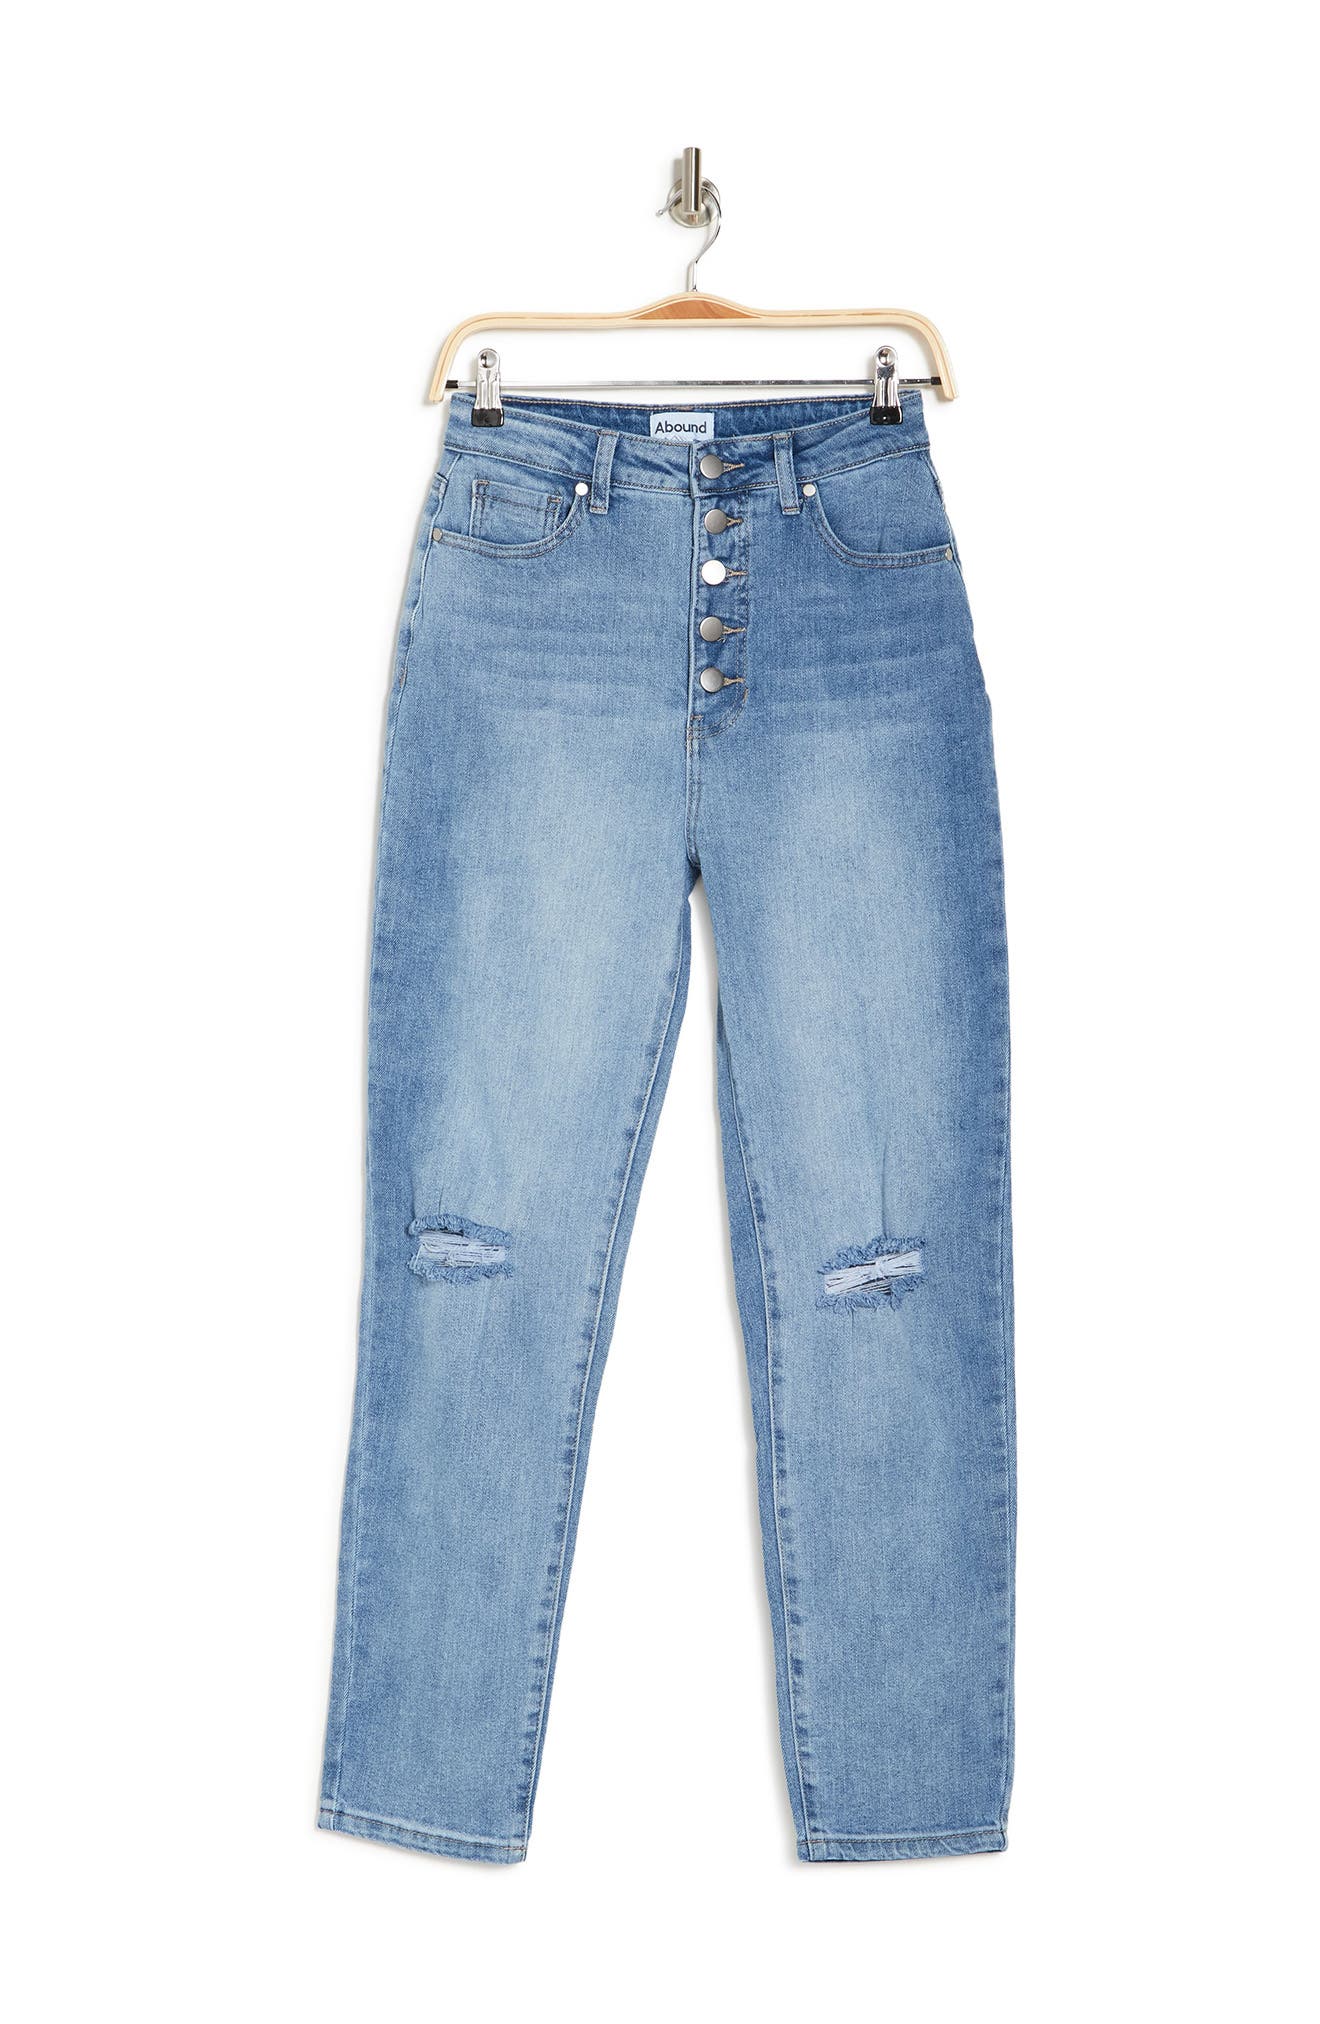 Abound Button Fly Sustainable Distressed Mom Jeans In Blue Light Wash